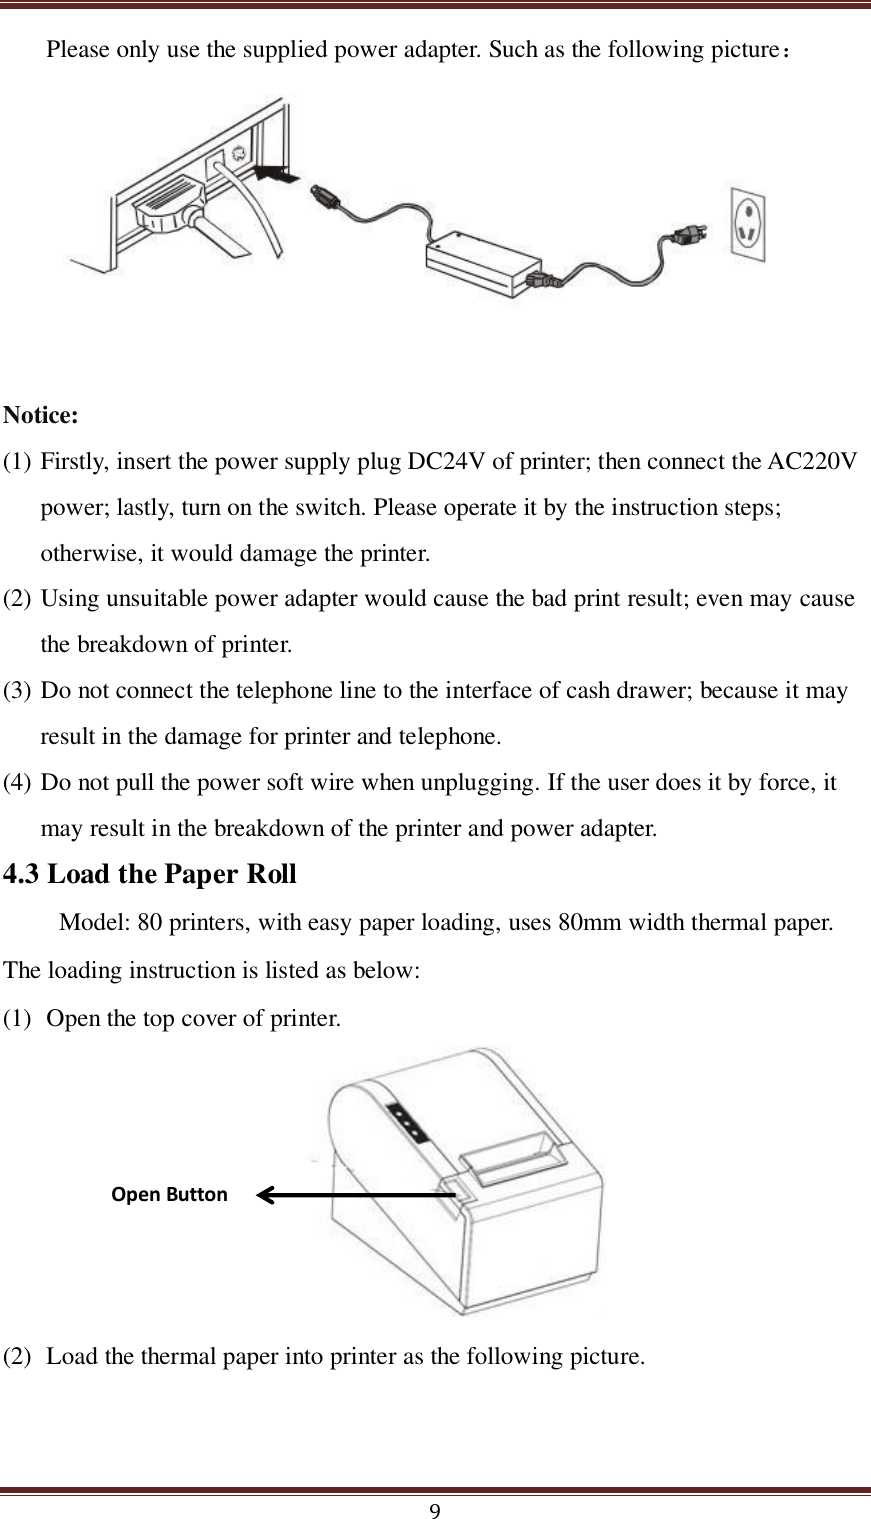  9 Please only use the supplied power adapter. Such as the following picture：        Notice: (1) Firstly, insert the power supply plug DC24V of printer; then connect the AC220V power; lastly, turn on the switch. Please operate it by the instruction steps; otherwise, it would damage the printer. (2) Using unsuitable power adapter would cause the bad print result; even may cause the breakdown of printer. (3) Do not connect the telephone line to the interface of cash drawer; because it may result in the damage for printer and telephone. (4) Do not pull the power soft wire when unplugging. If the user does it by force, it may result in the breakdown of the printer and power adapter. 4.3 Load the Paper Roll Model: 80 printers, with easy paper loading, uses 80mm width thermal paper. The loading instruction is listed as below: (1) Open the top cover of printer.   (2) Load the thermal paper into printer as the following picture. Open Button 